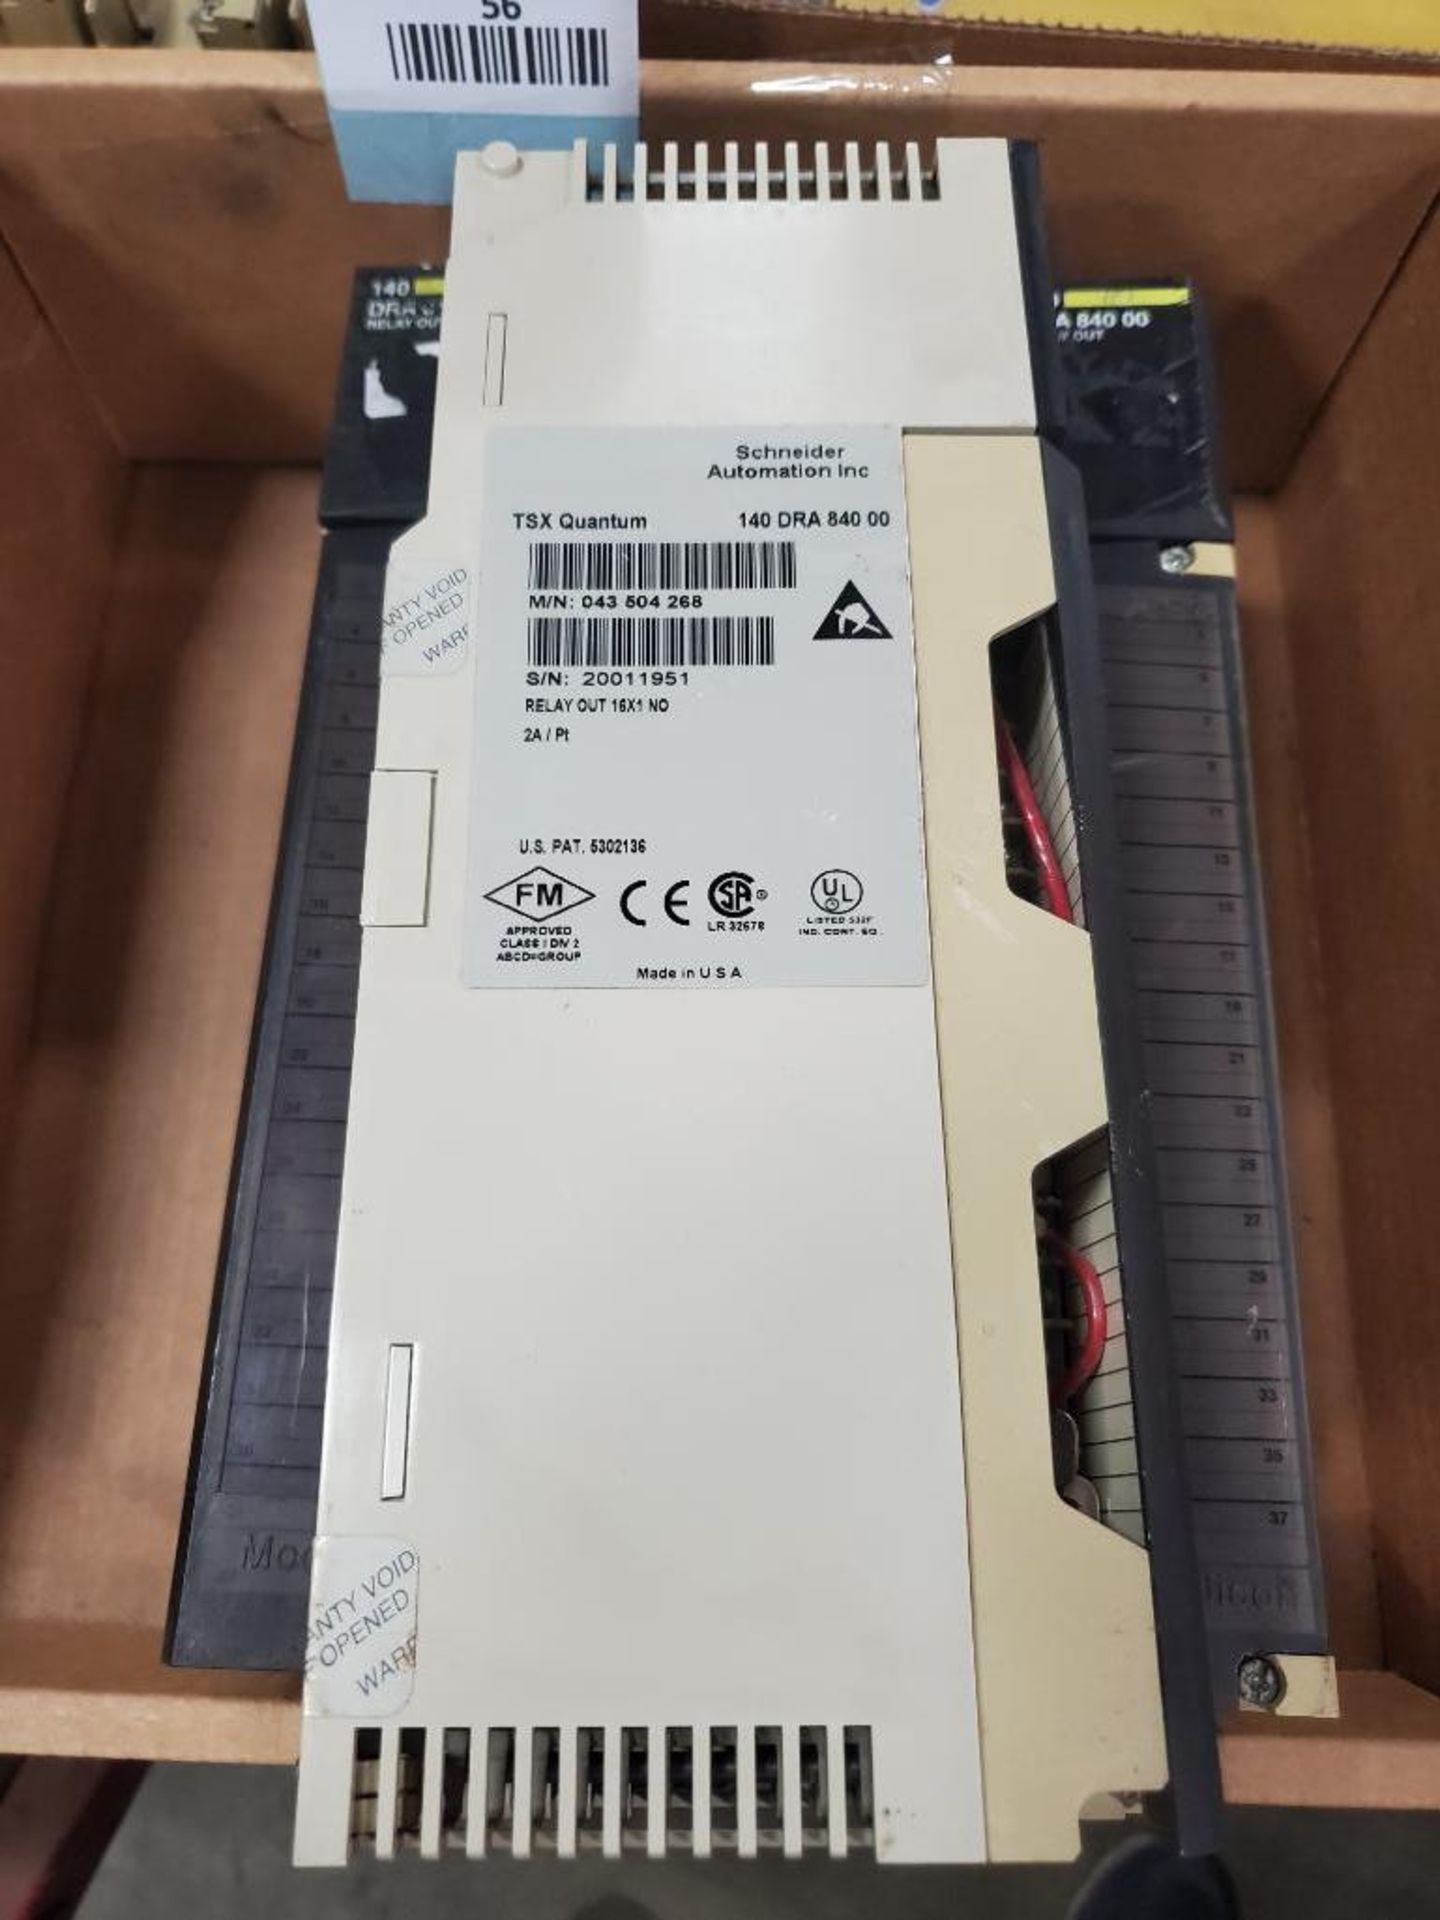 Qty 5 - AEG Schneider Automation DRA84000 RELAY OUT module. TSX Quantum 140DRA84000. - Image 4 of 5